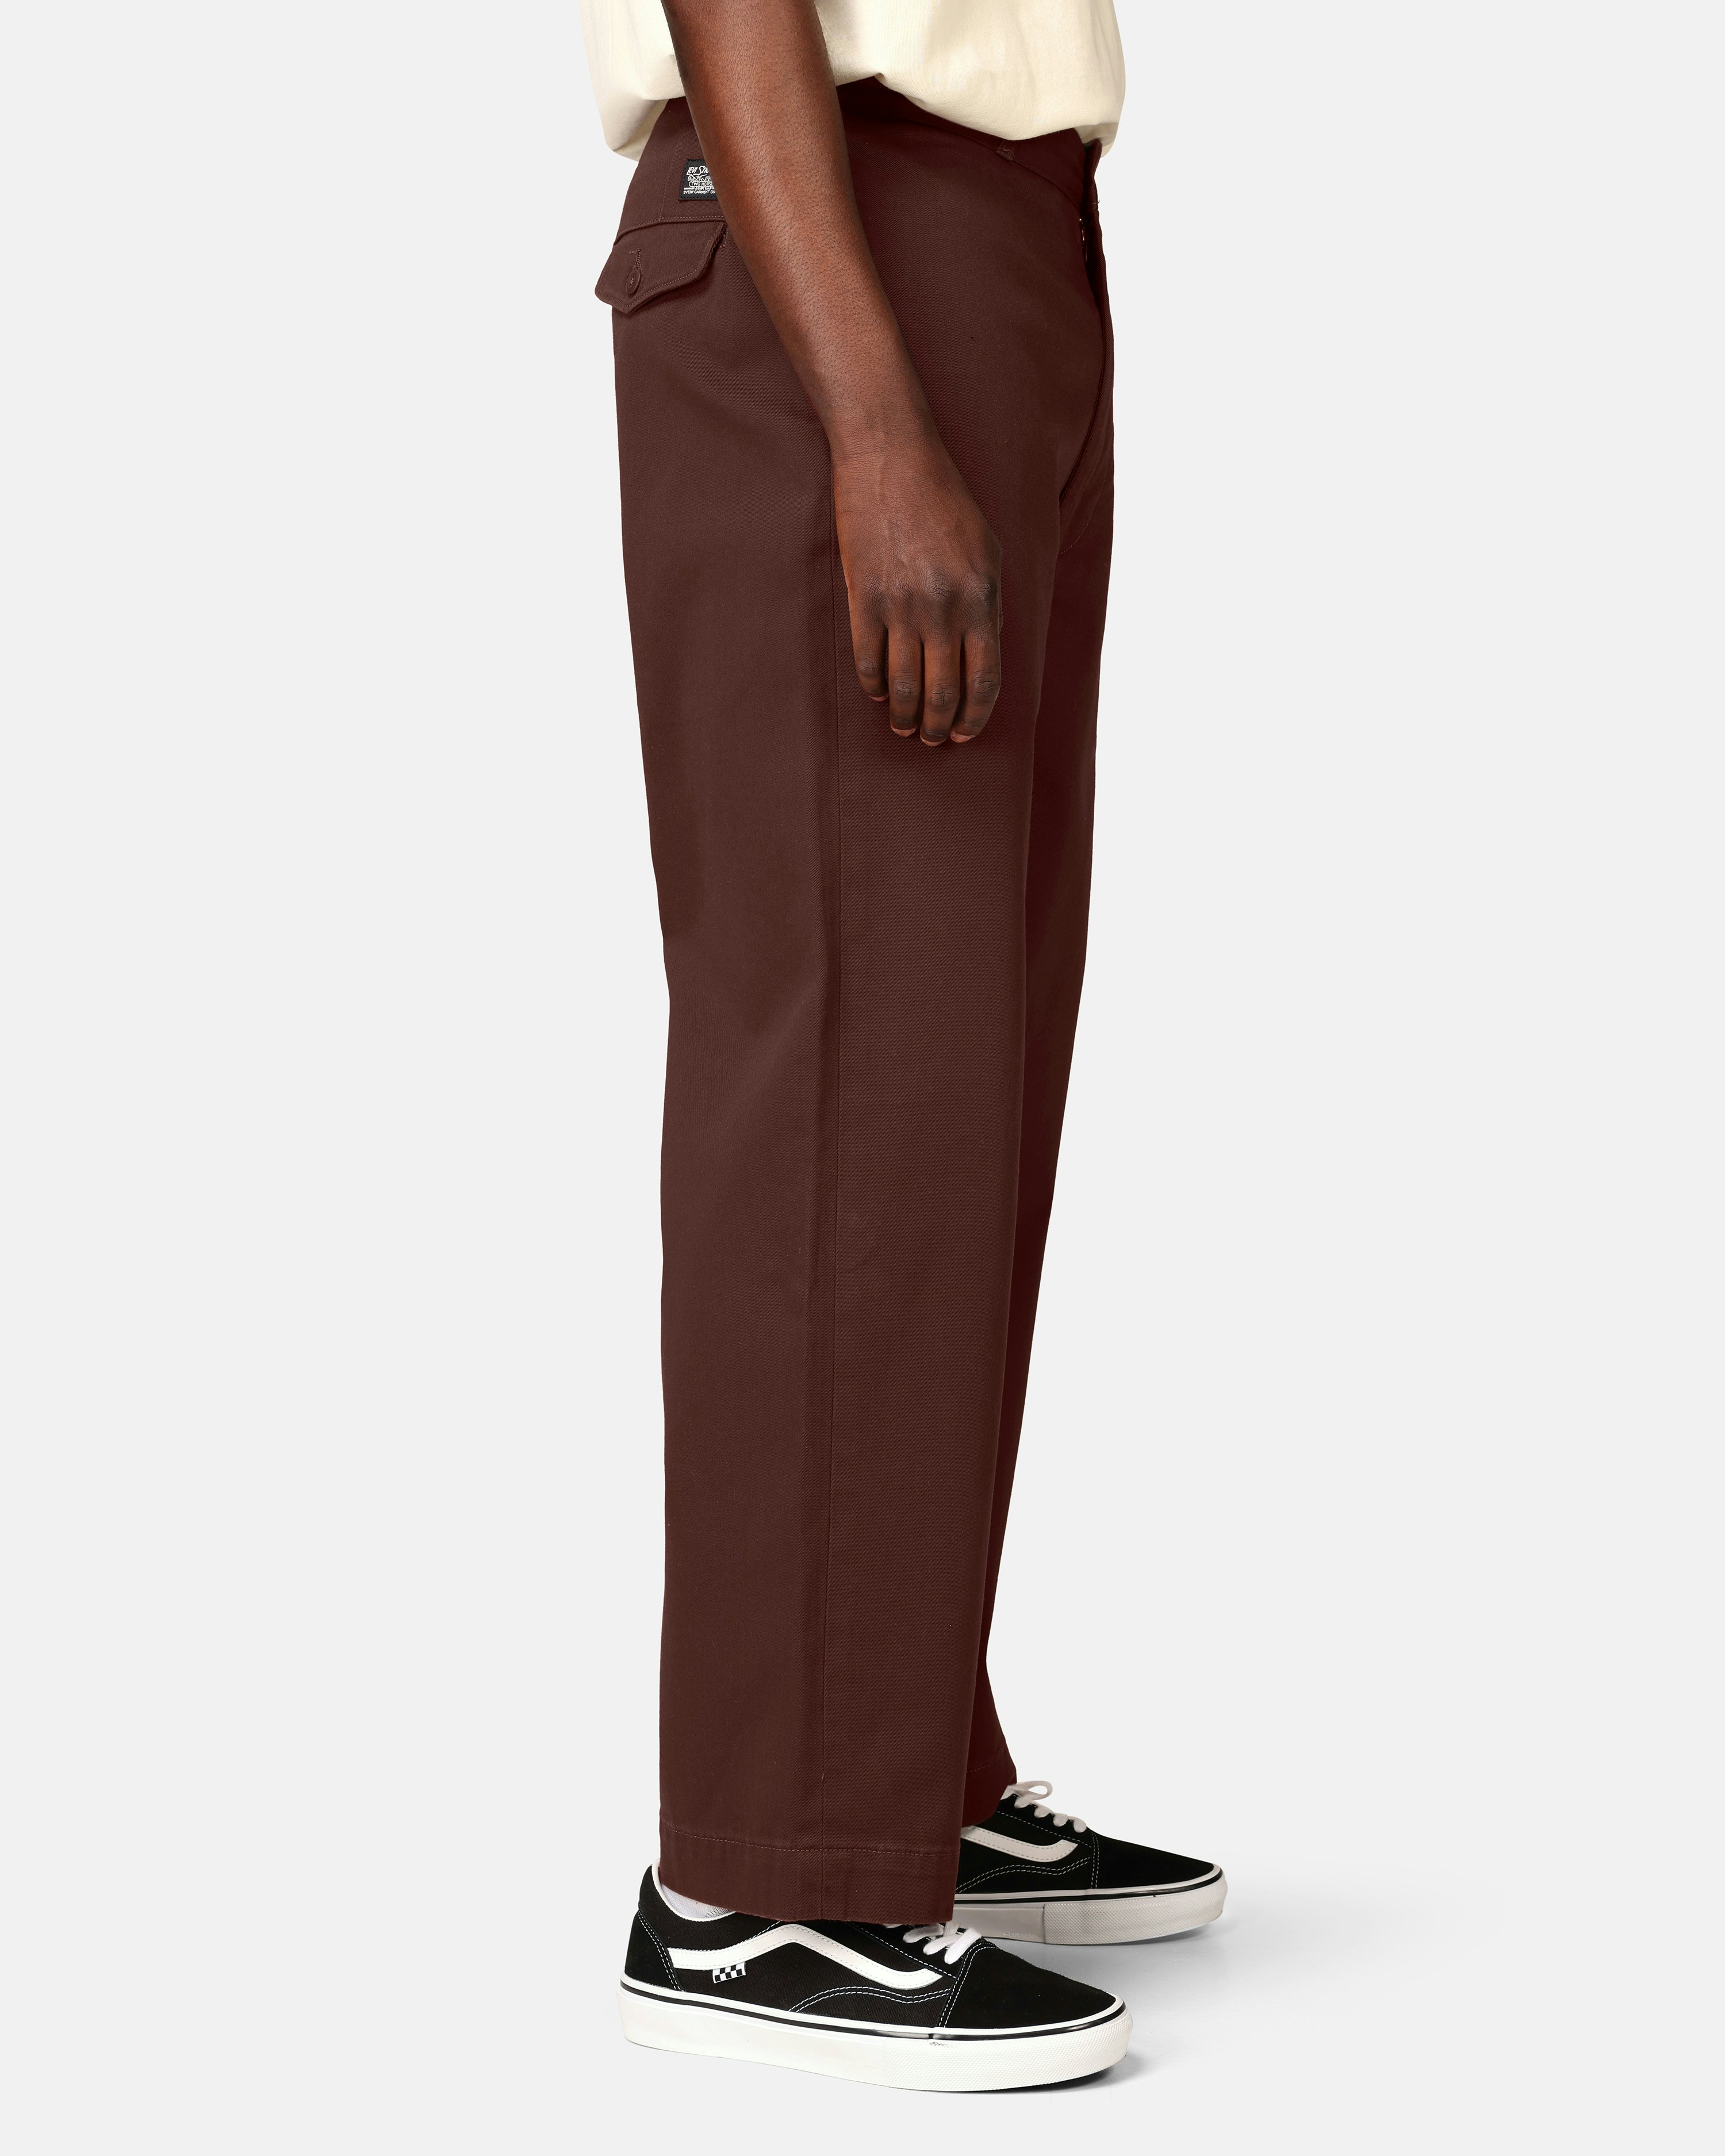 INDEPENDENT SPAN SKATE PANT CHINO BROWN – 3rd Lair